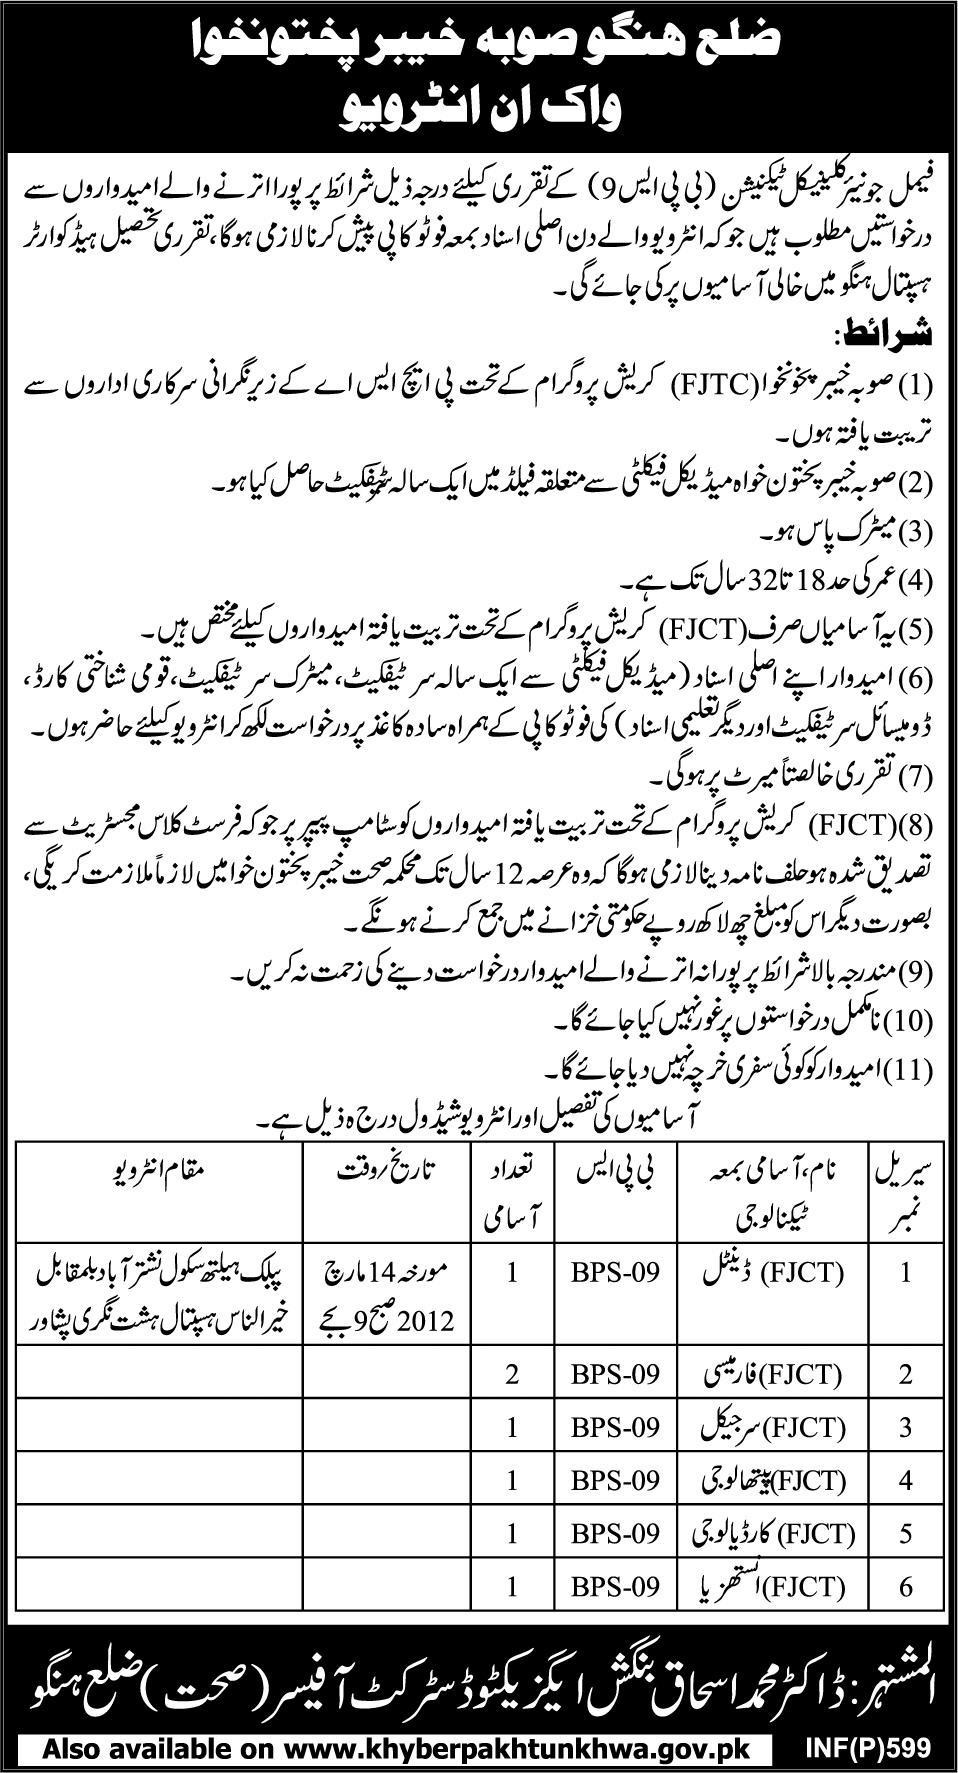 Female Junior Clinical Technician Required by Government of KPK